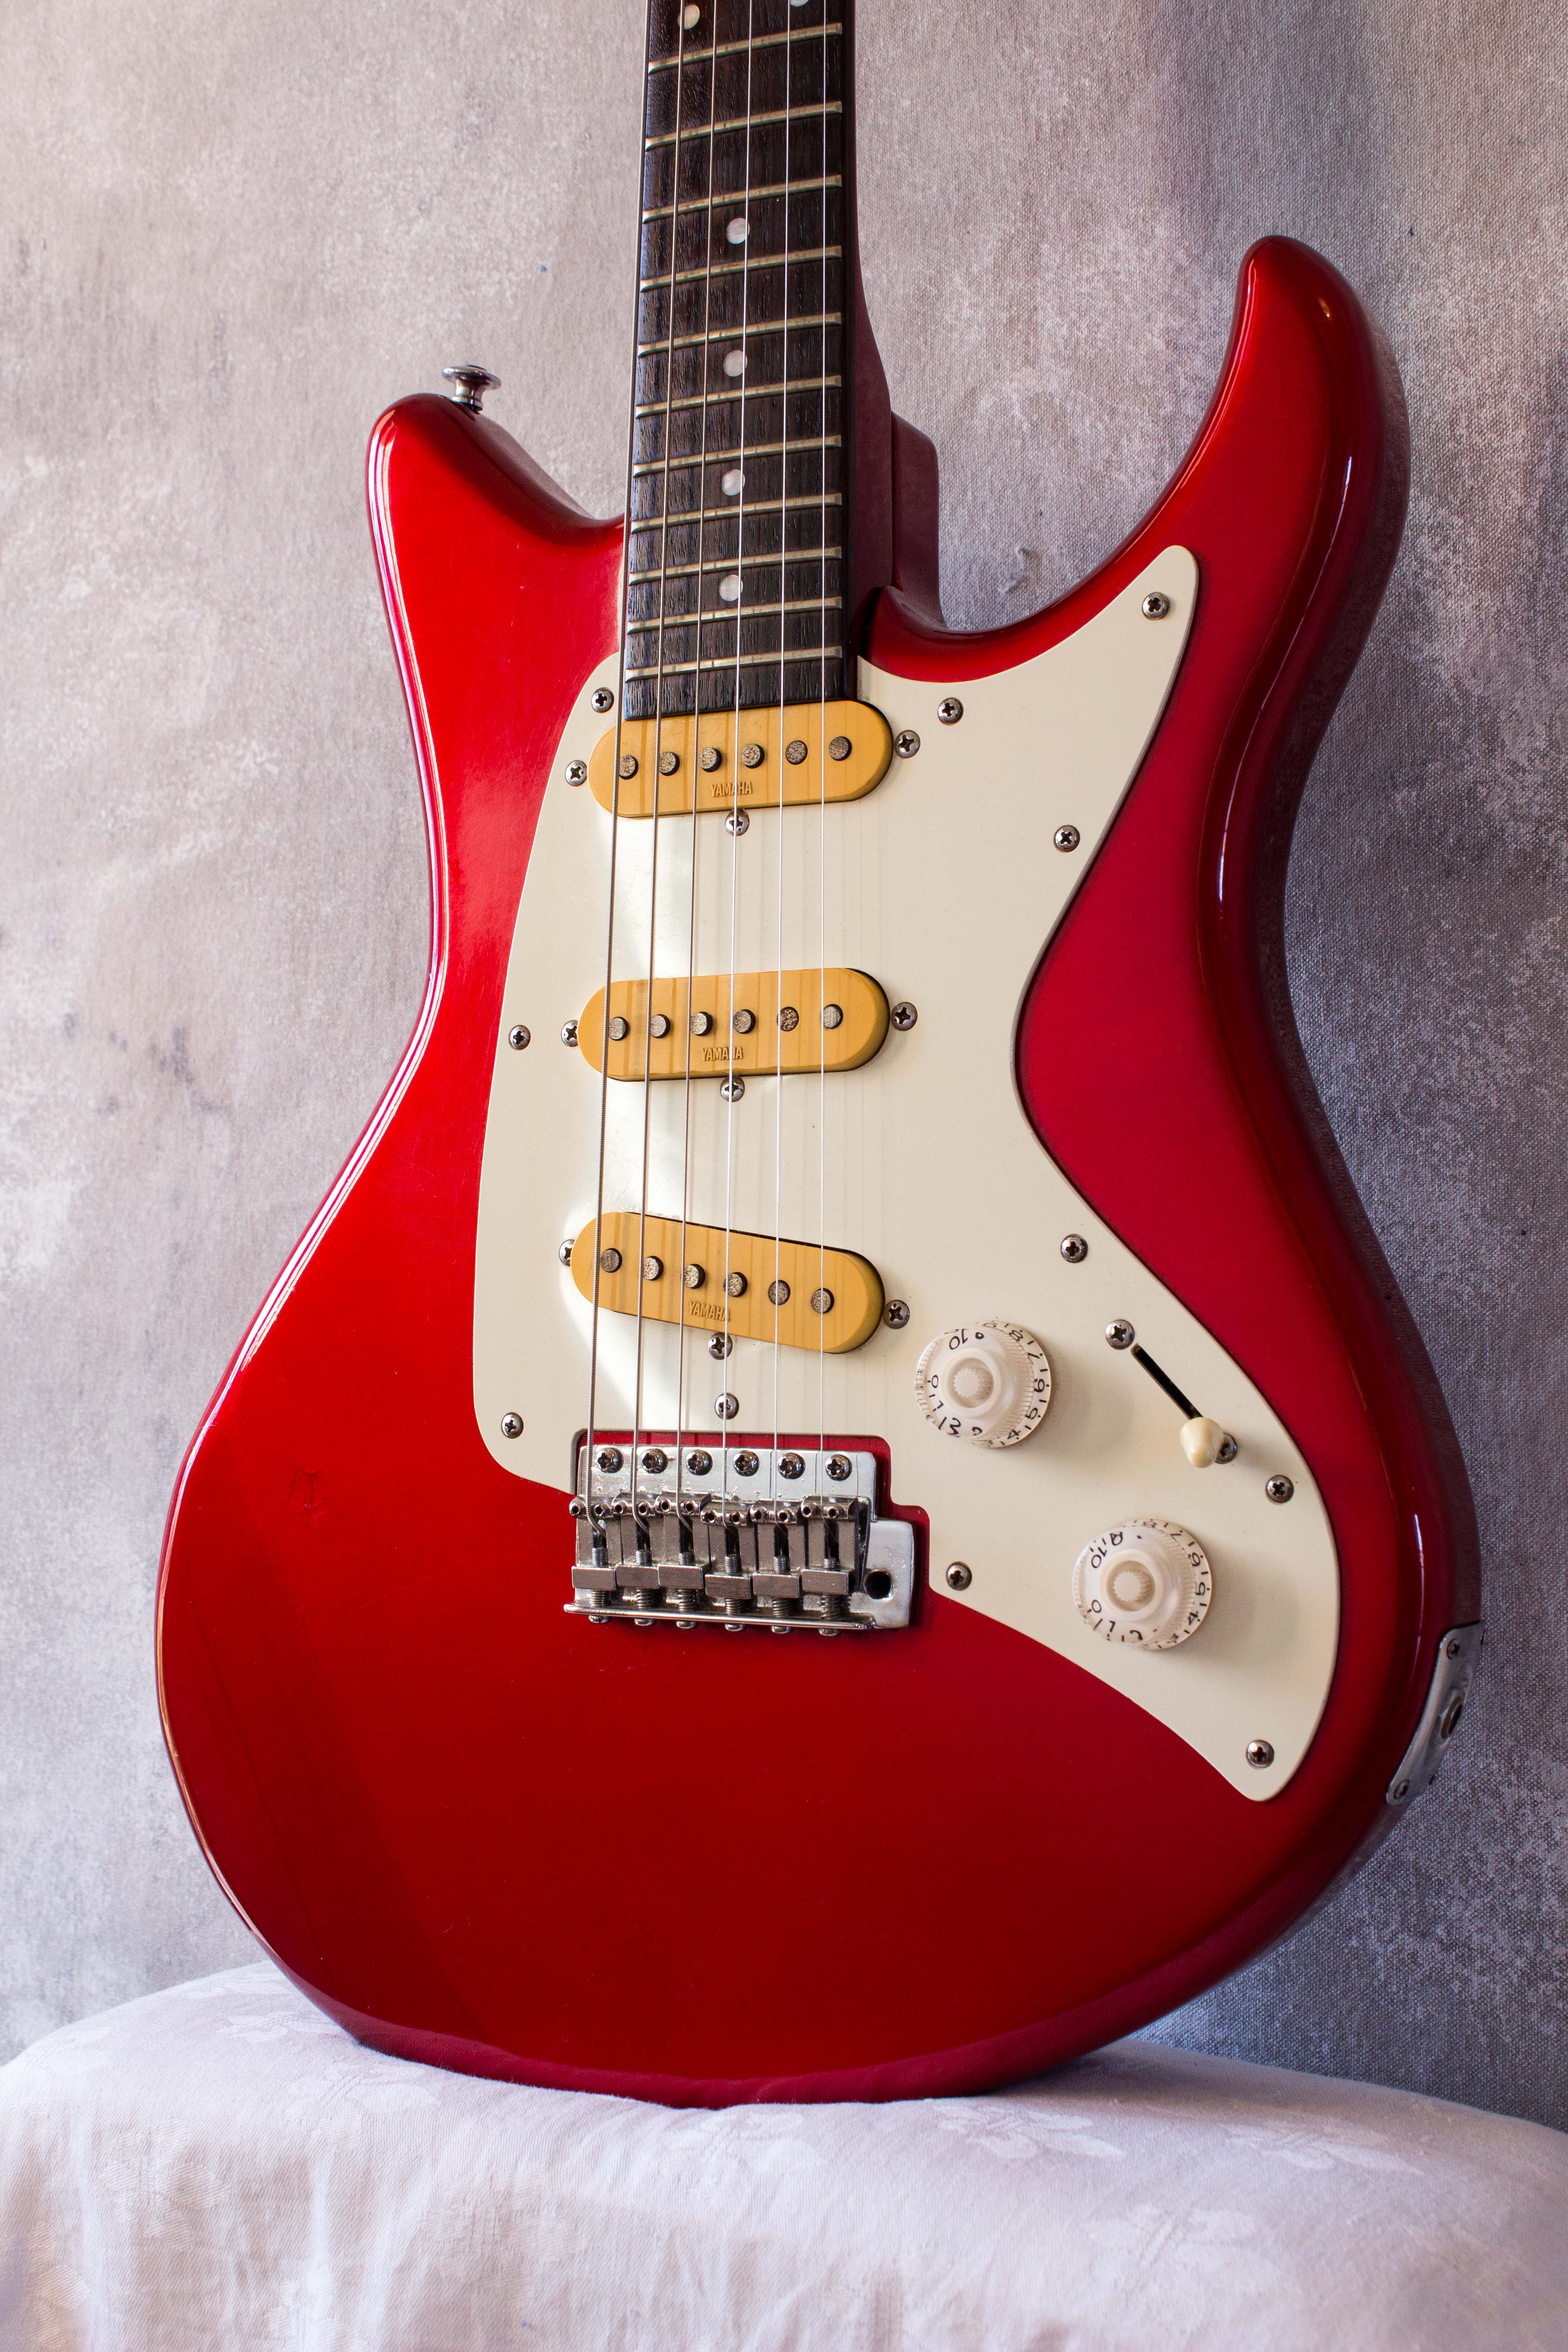 Yamaha SS-300 Candy Apple Red 1982 – Topshelf Instruments